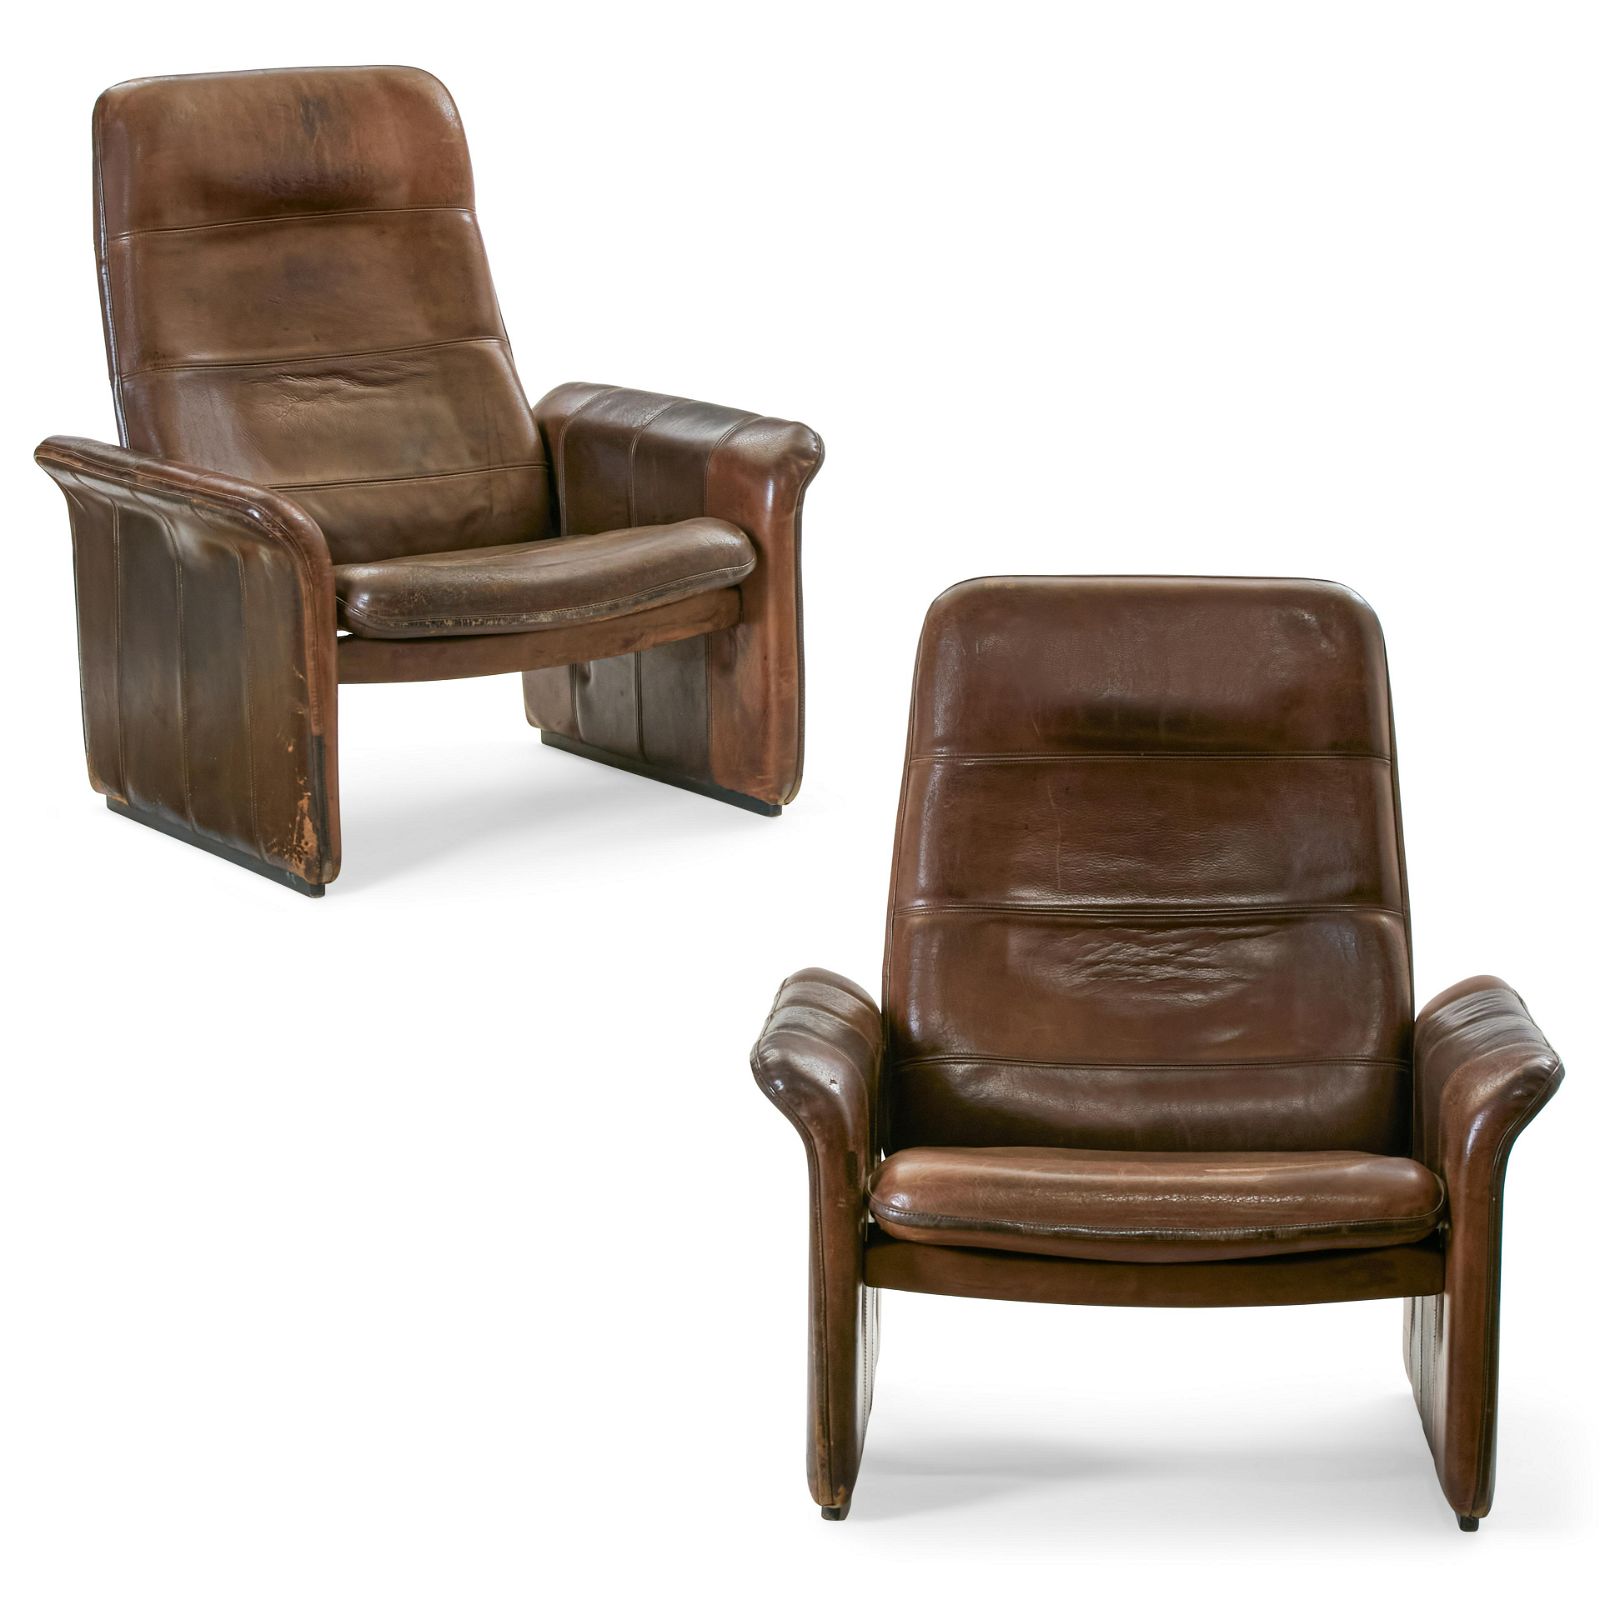 A PAIR OF DE SEDE BROWN LEATHER